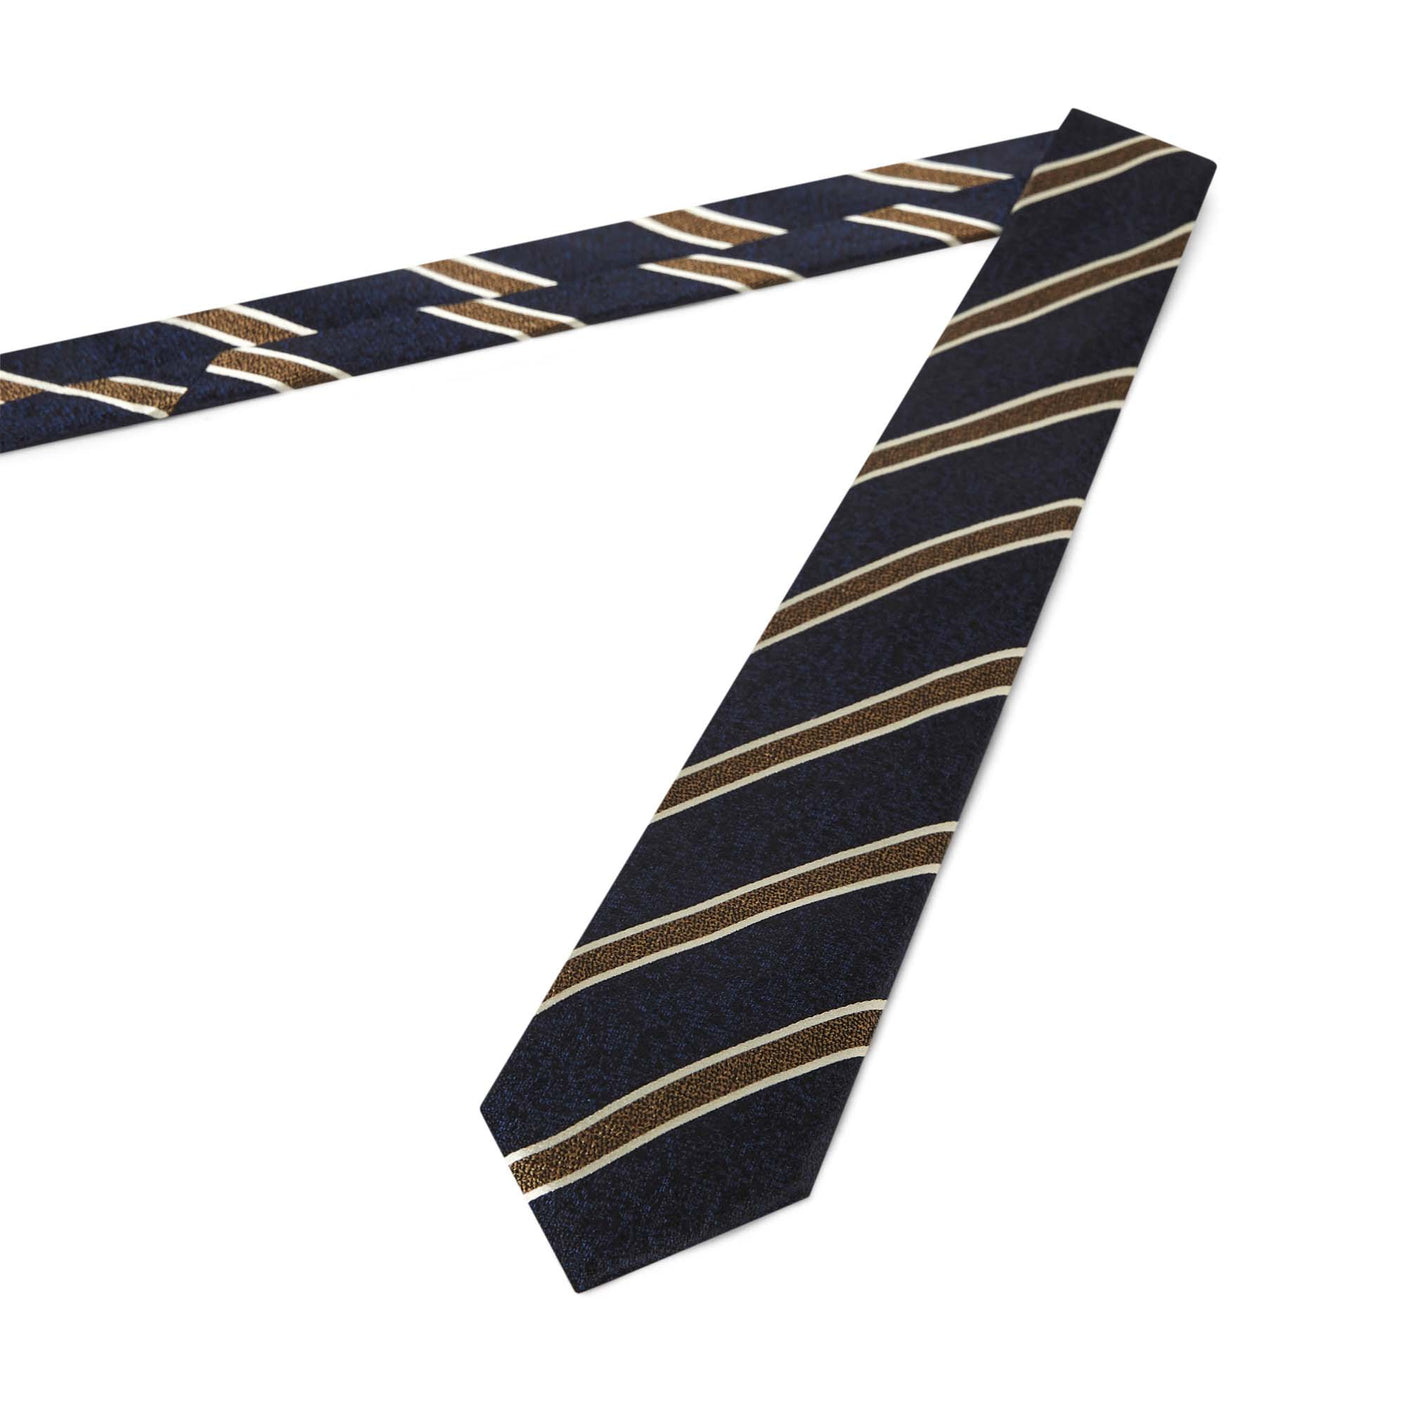 Club tie with wide stripes - blue and gold